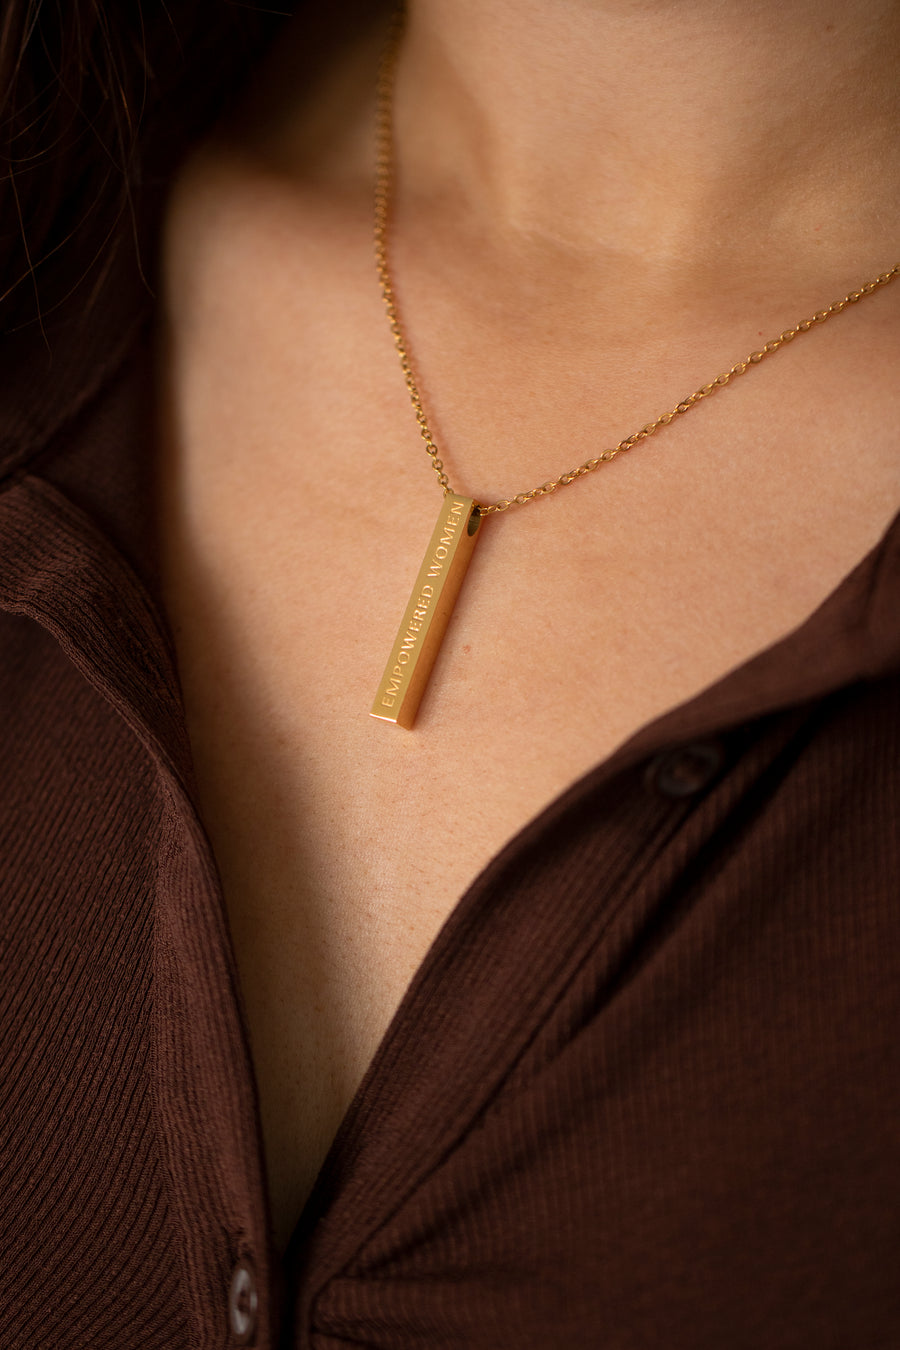 Woman wearing gold empowering necklace